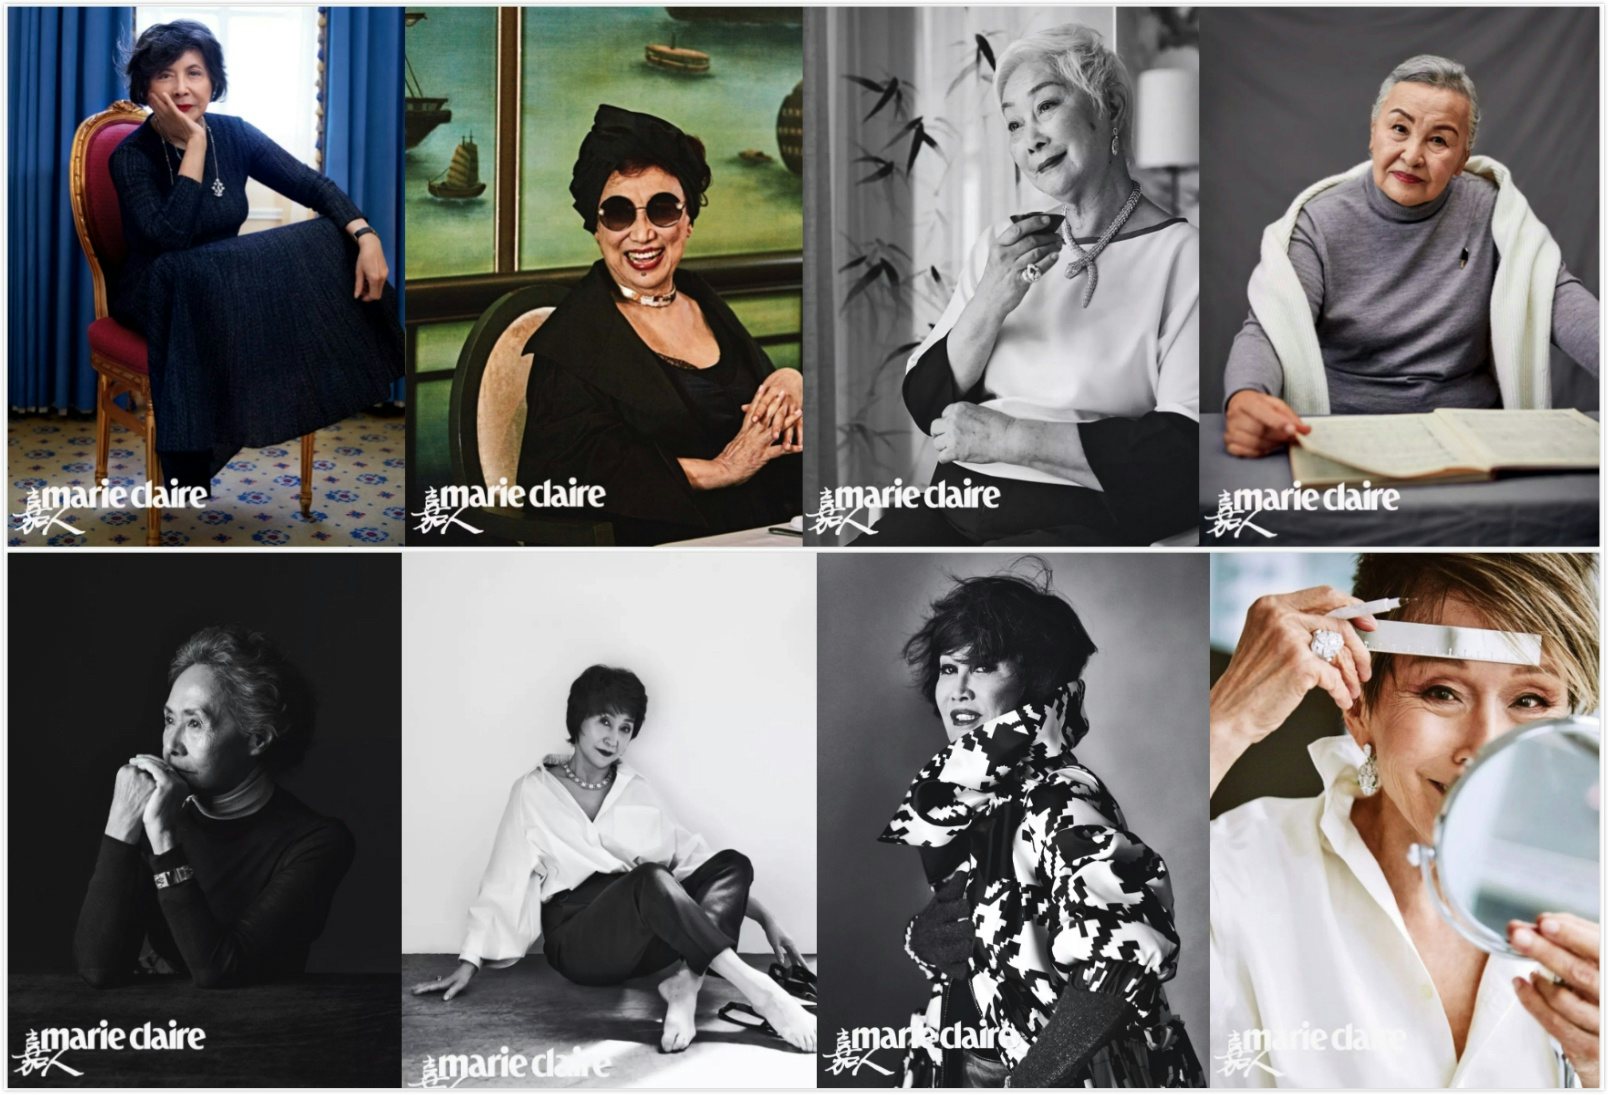 Marie Claire China features eight elder socialites with Chinese heritage in its upcoming September issue. From top left to right bottom are: Tsai Chin, Rebecca Pan, Lisa Lu, Zheng Xiaoying, Wu Yanshu, Chen Ailian, Yue-Sai Kan, and Jane Hsiang. Photo: Marie Claire China and Jing Daily illustration. 